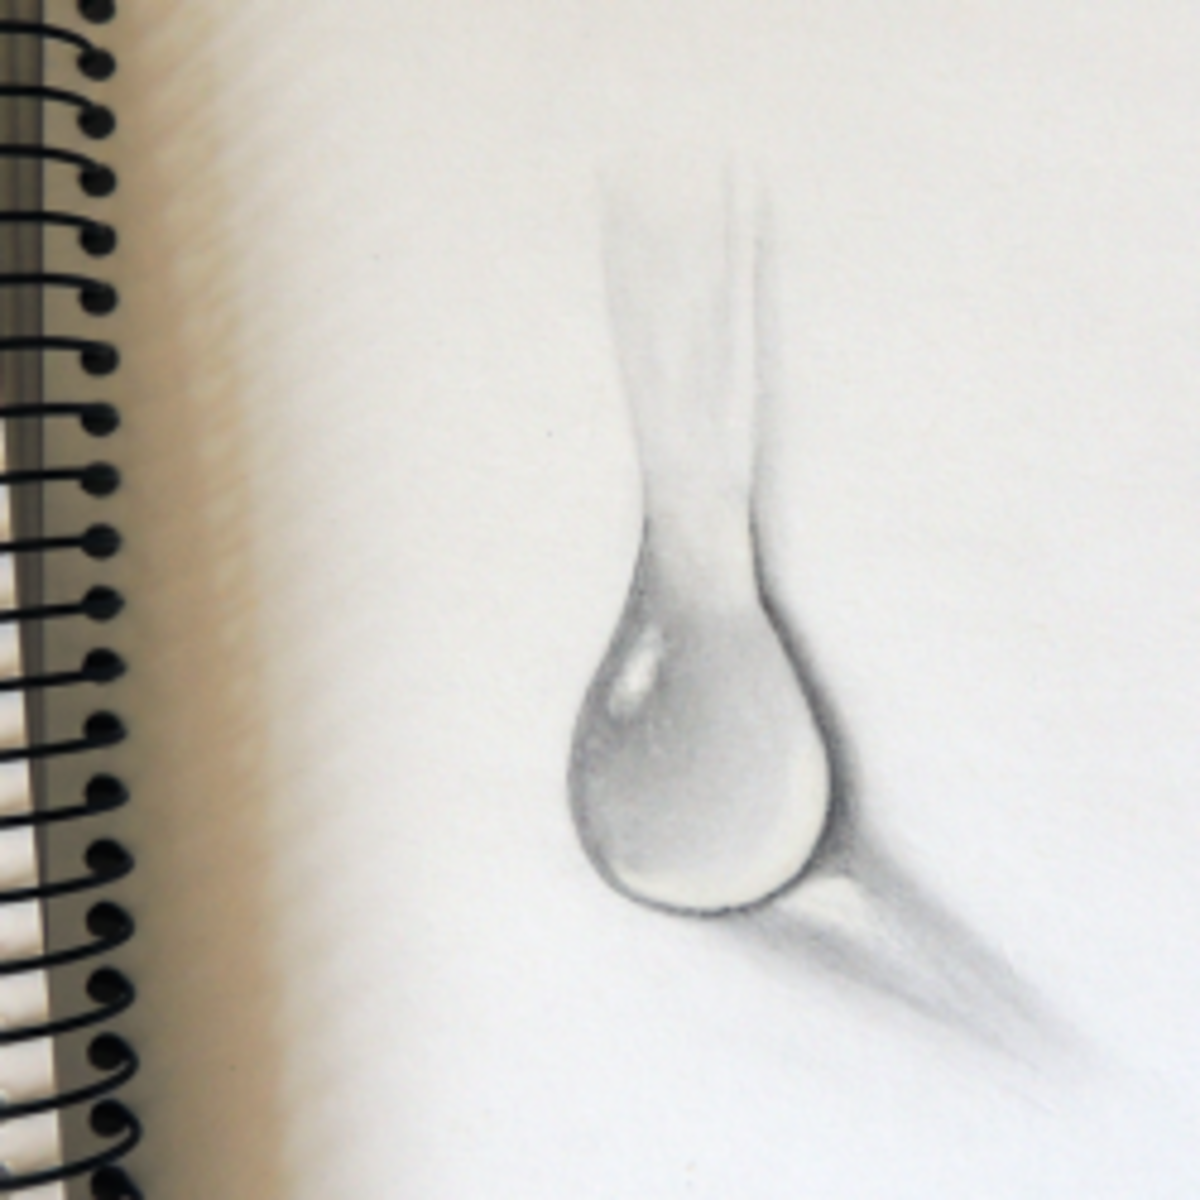 ★ How to Draw a Water Drop | Drawing Tutorial & Video Demos ★